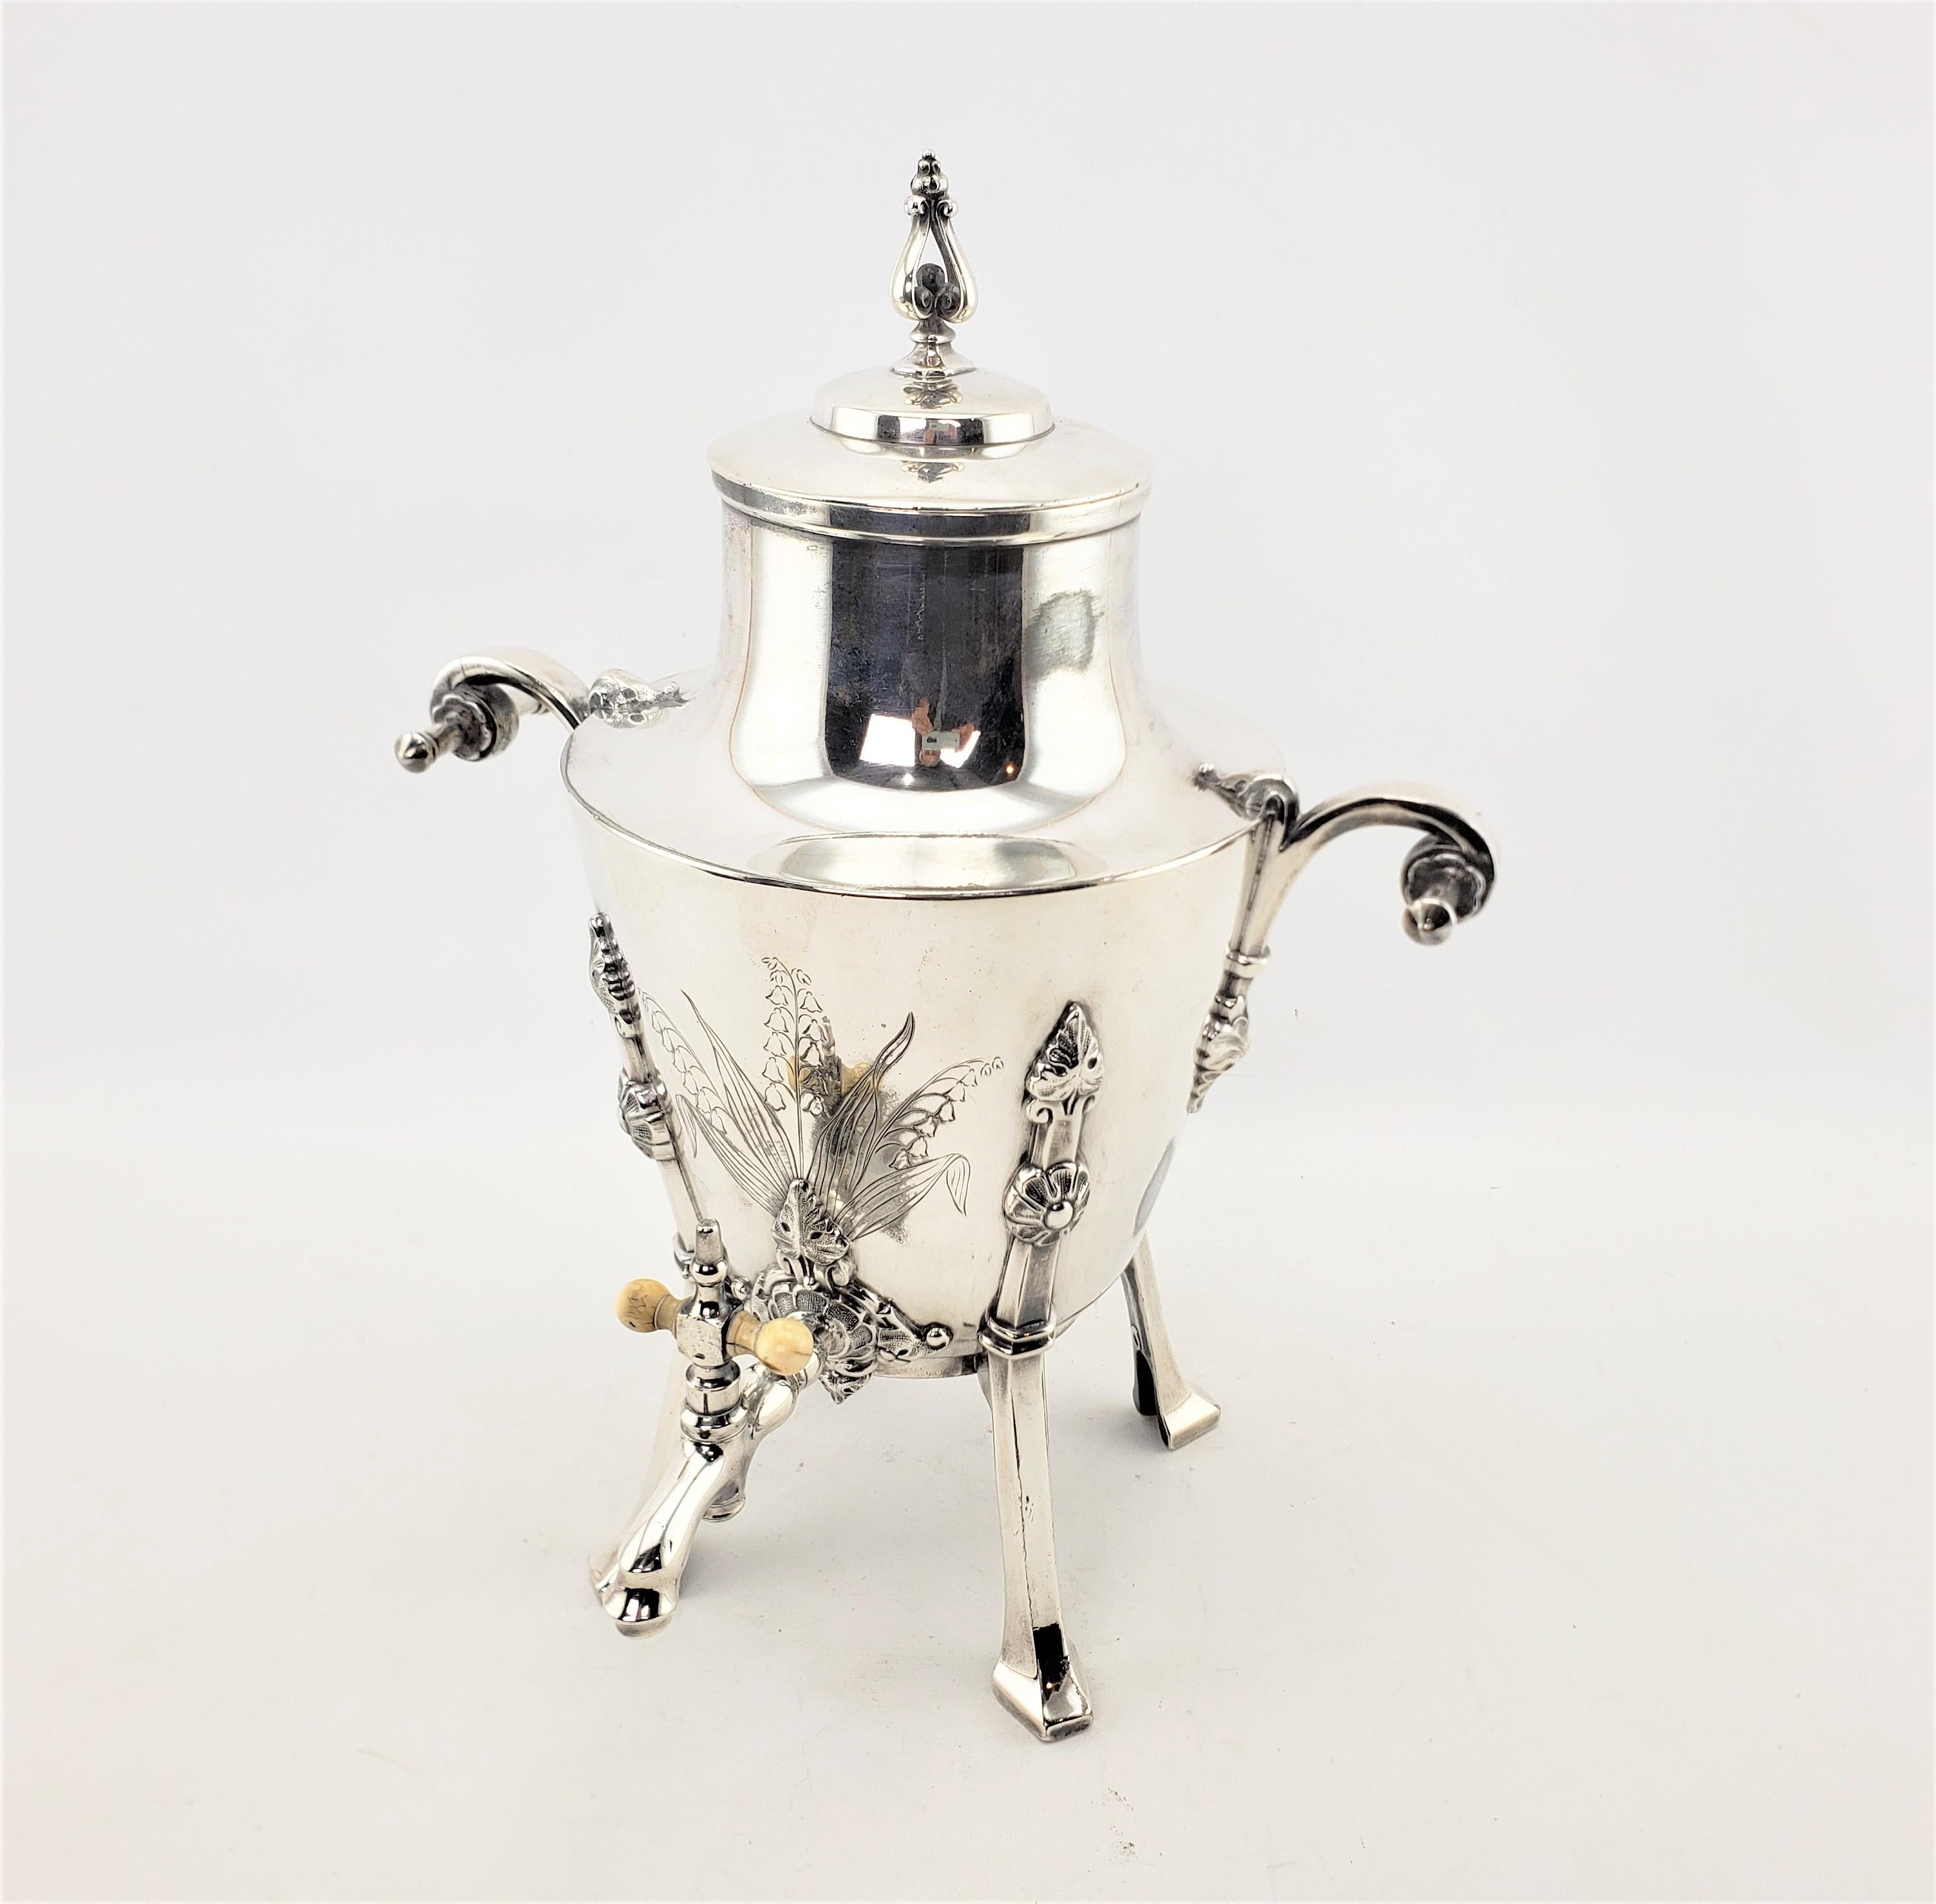 Machine-Made Antique Aesthetic Movement Silver Plated Hot Water Urn with Floral Decoration For Sale